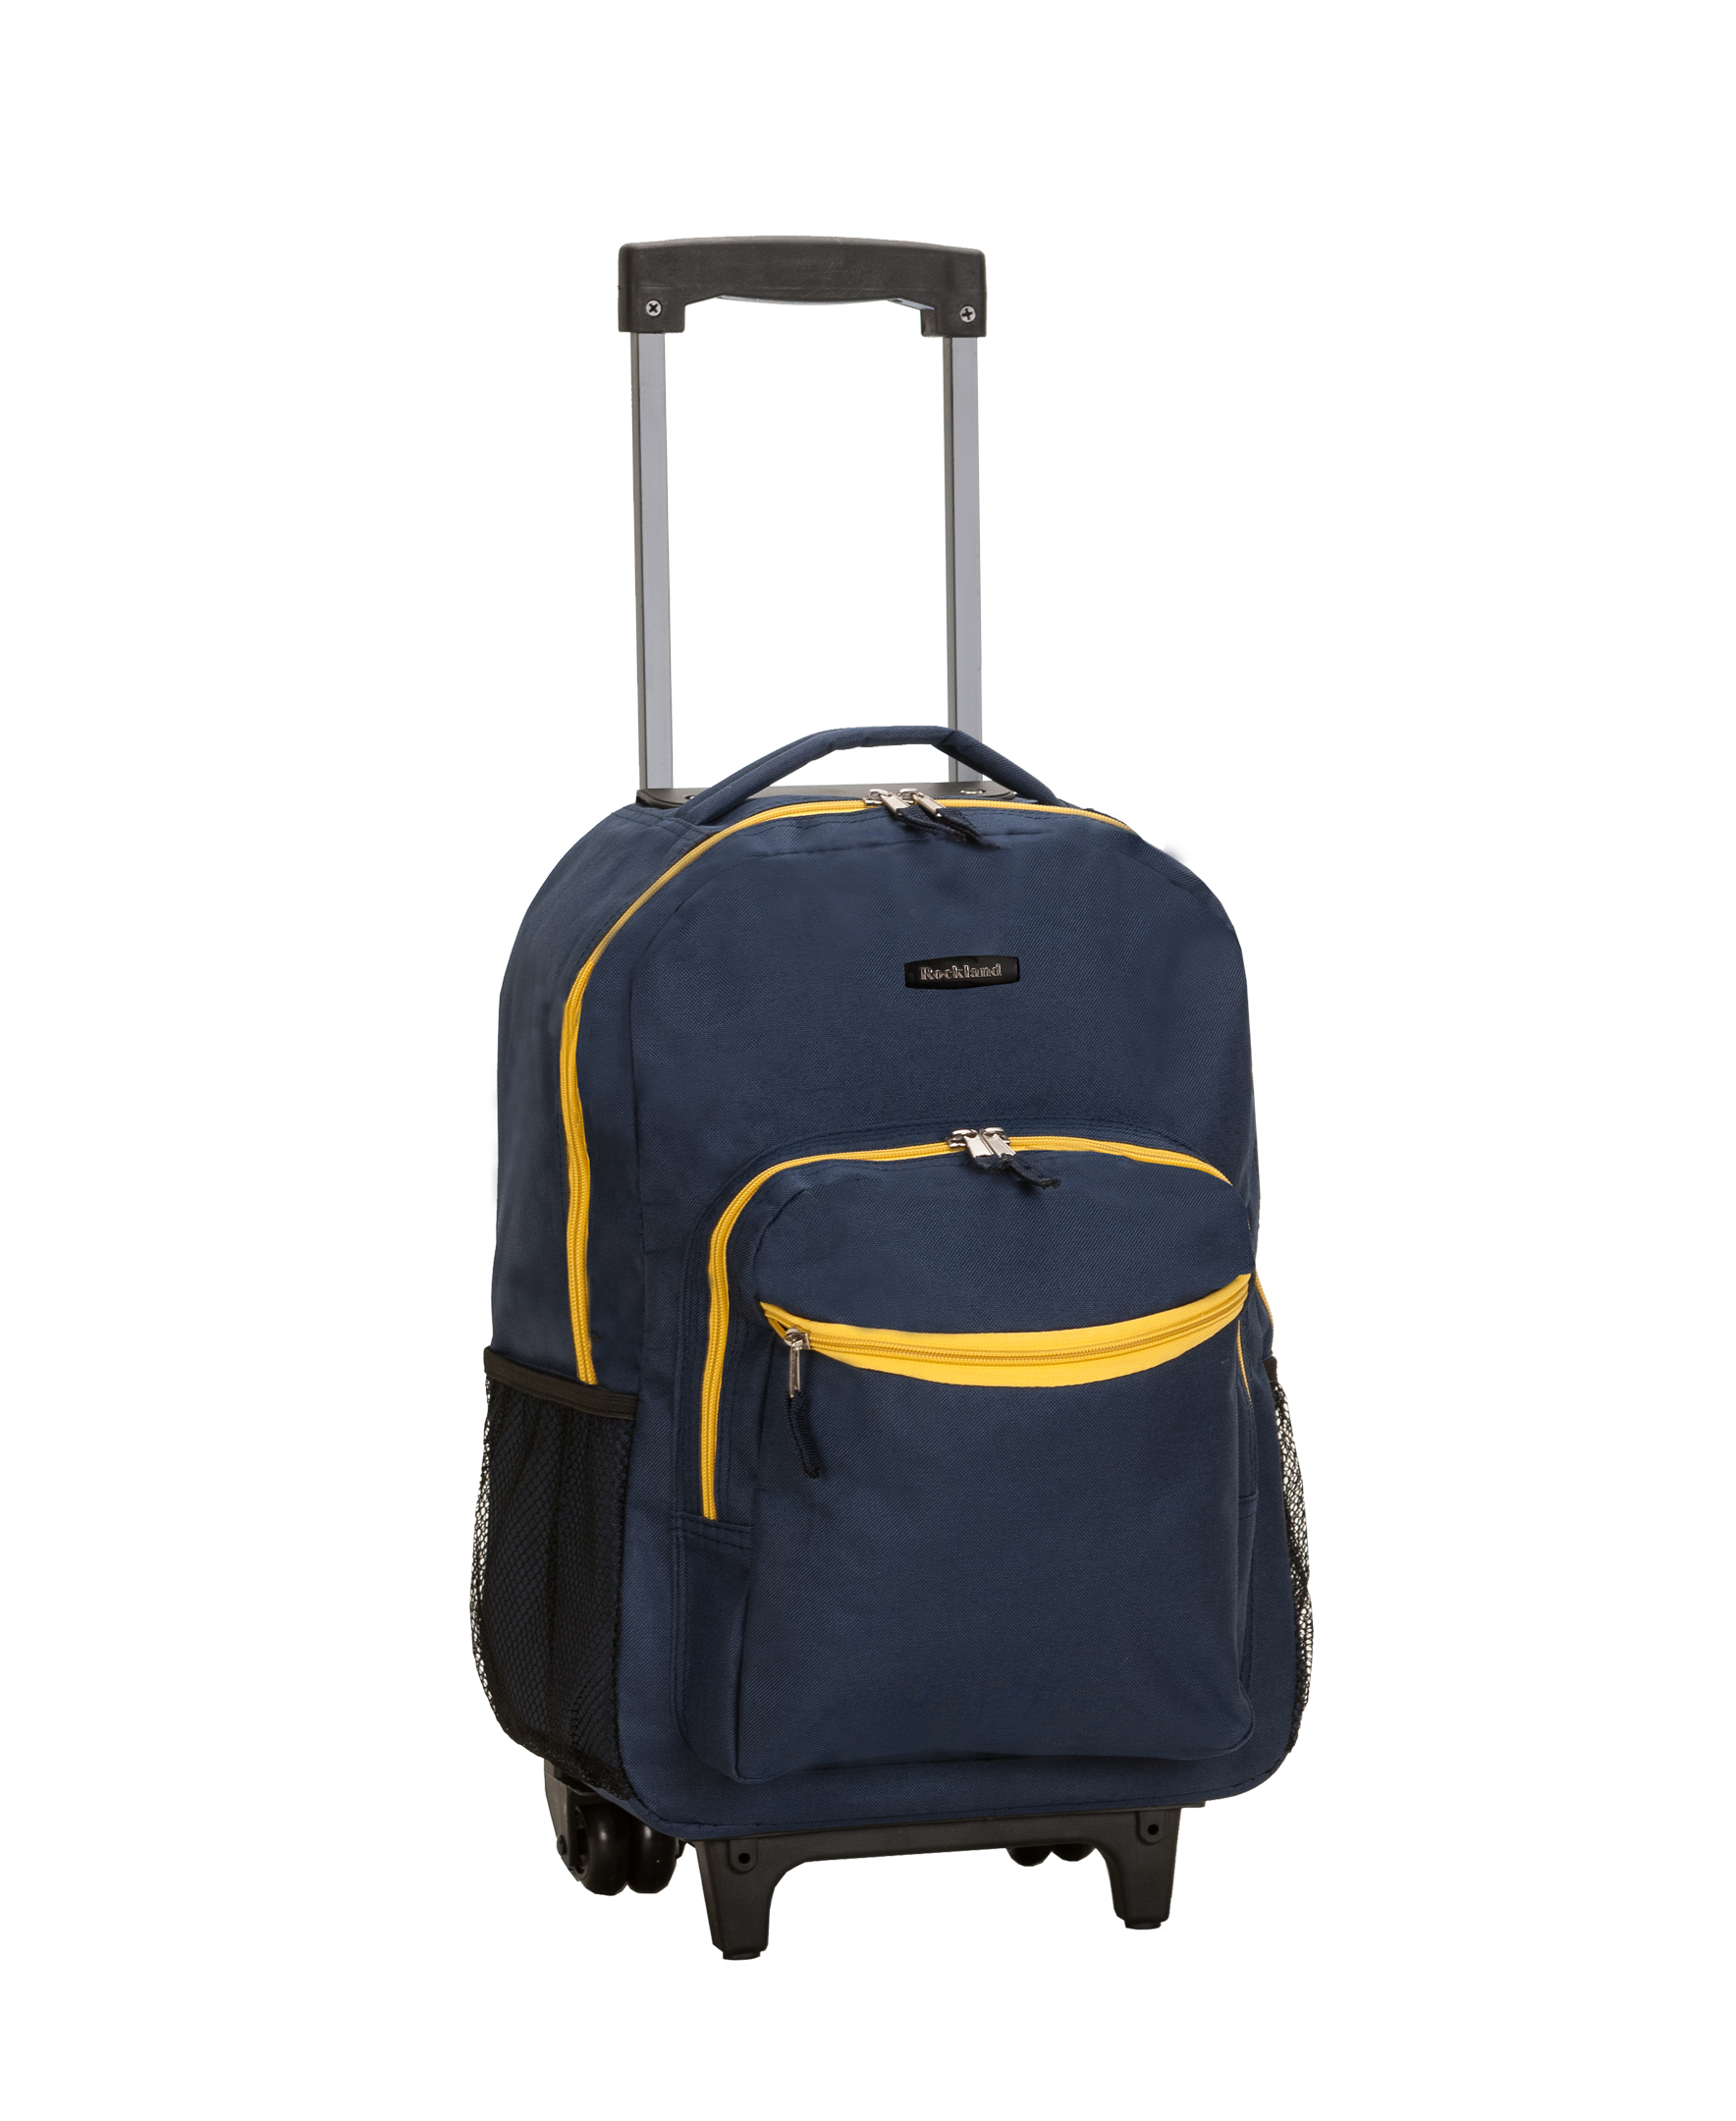 Rockland 17 Rolling Backpack R01 - image 1 of 2